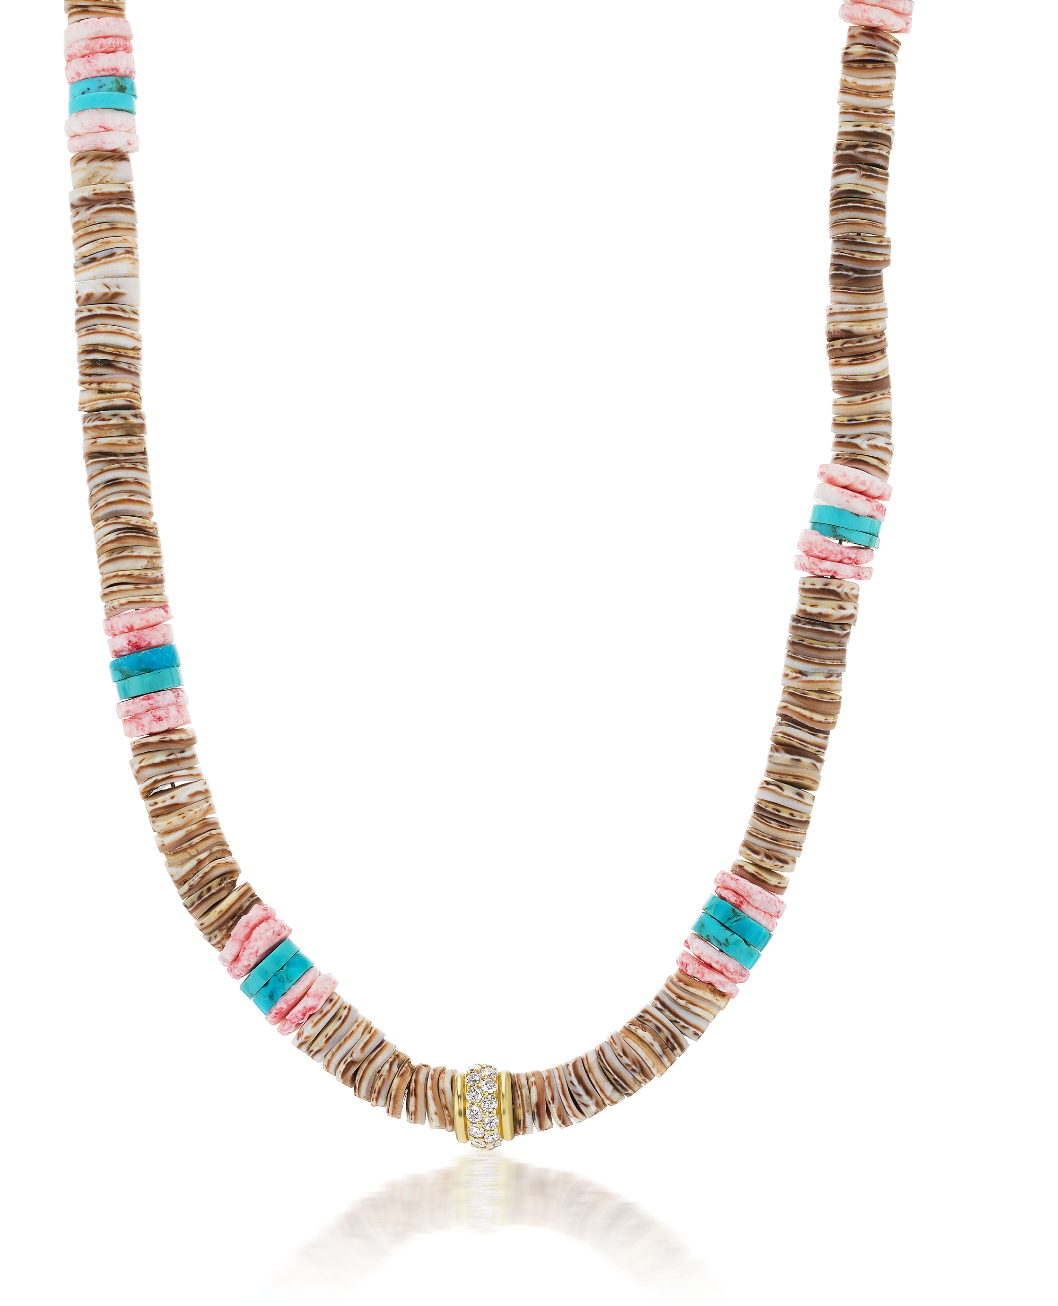 Beaded Necklace with Gold Charm Clasp